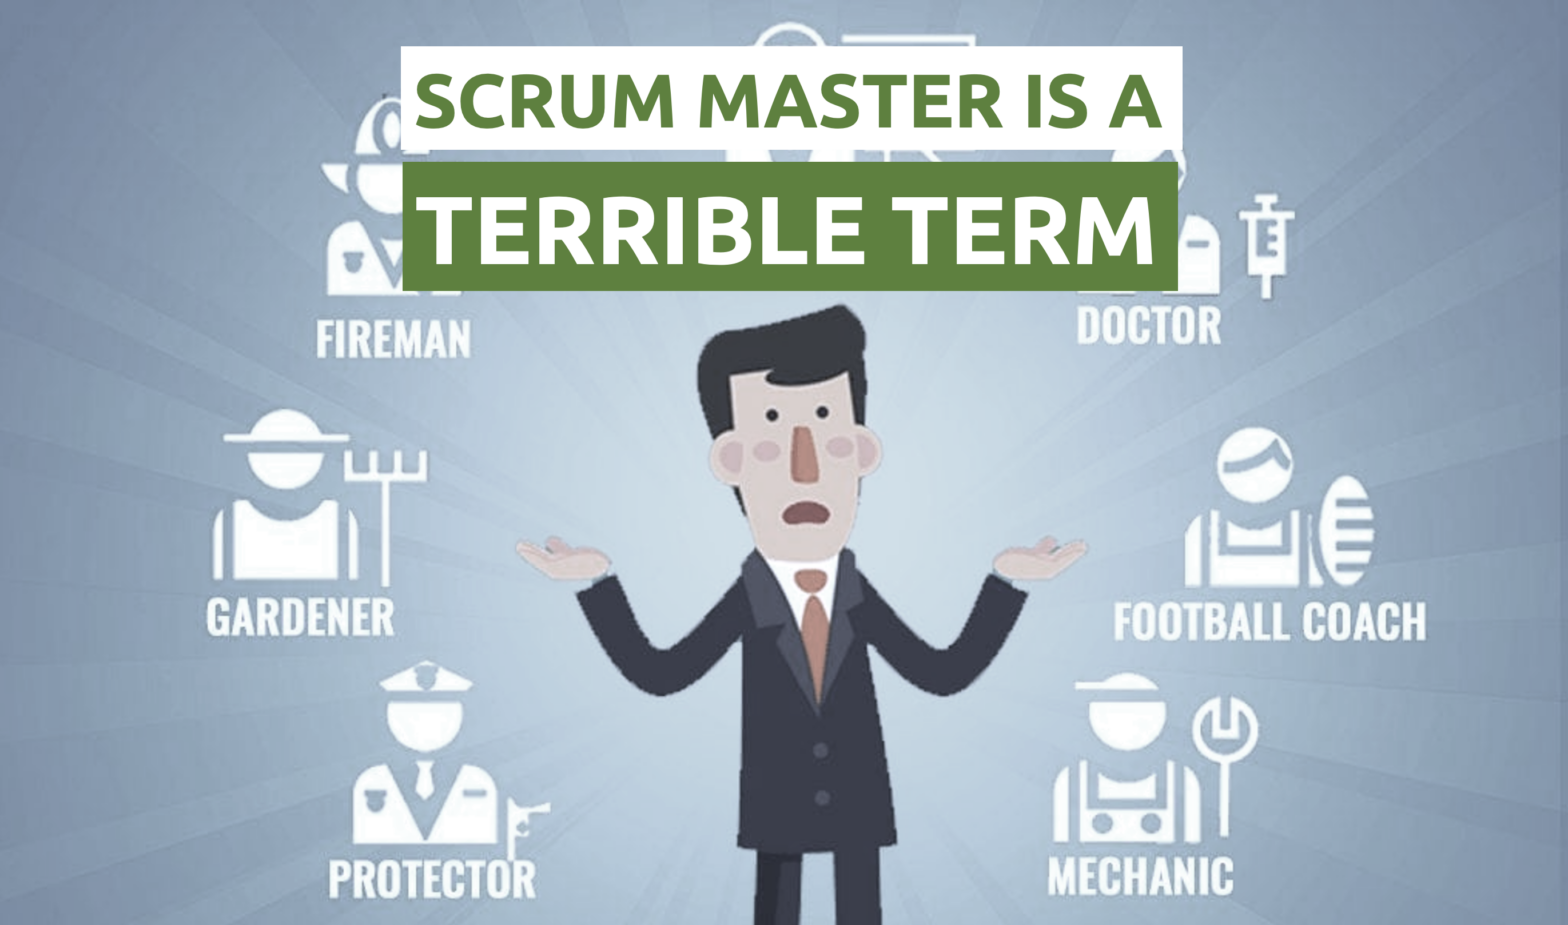 Scrum Master is a Terrible Term